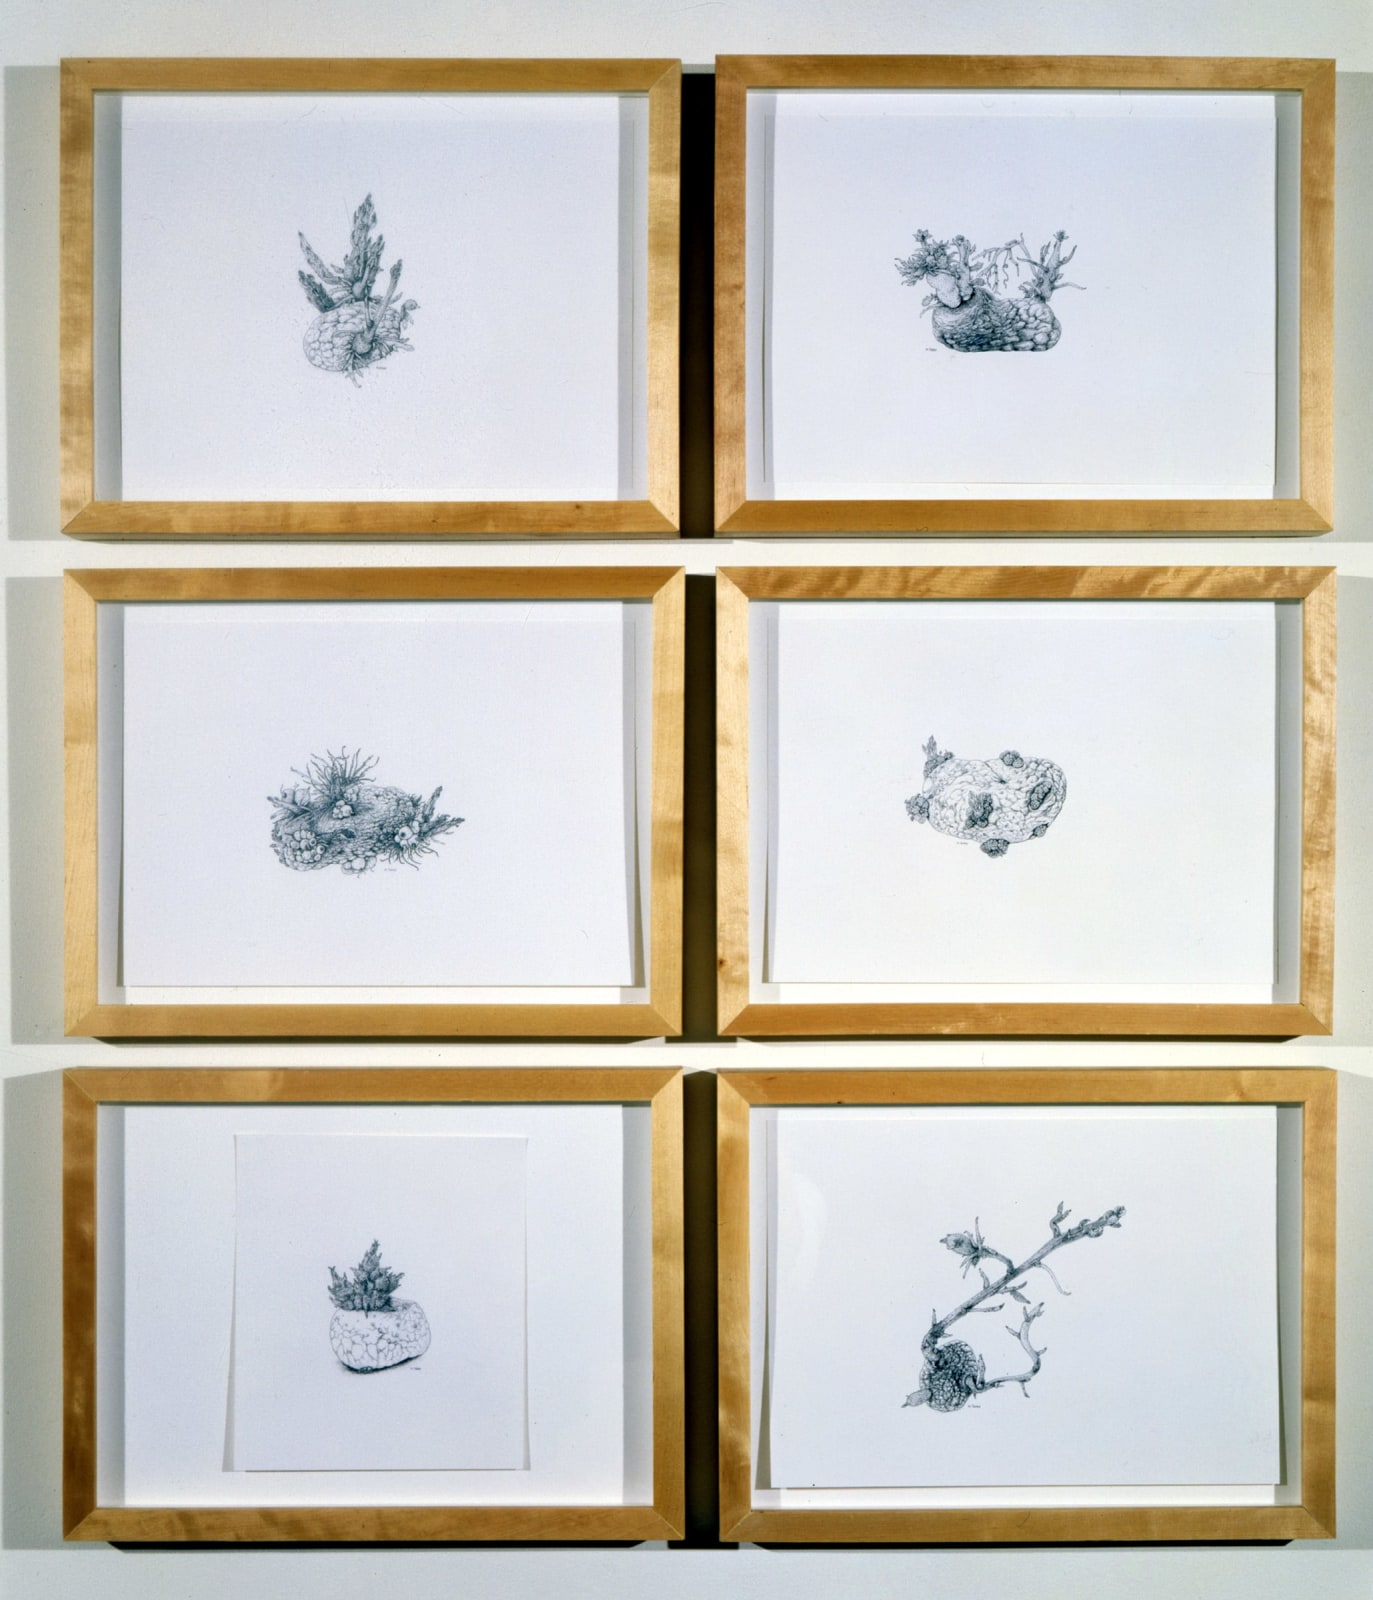 ANYA GALLACCIO, Six potatoes drawn- (belief in an immaculate being) , 2001